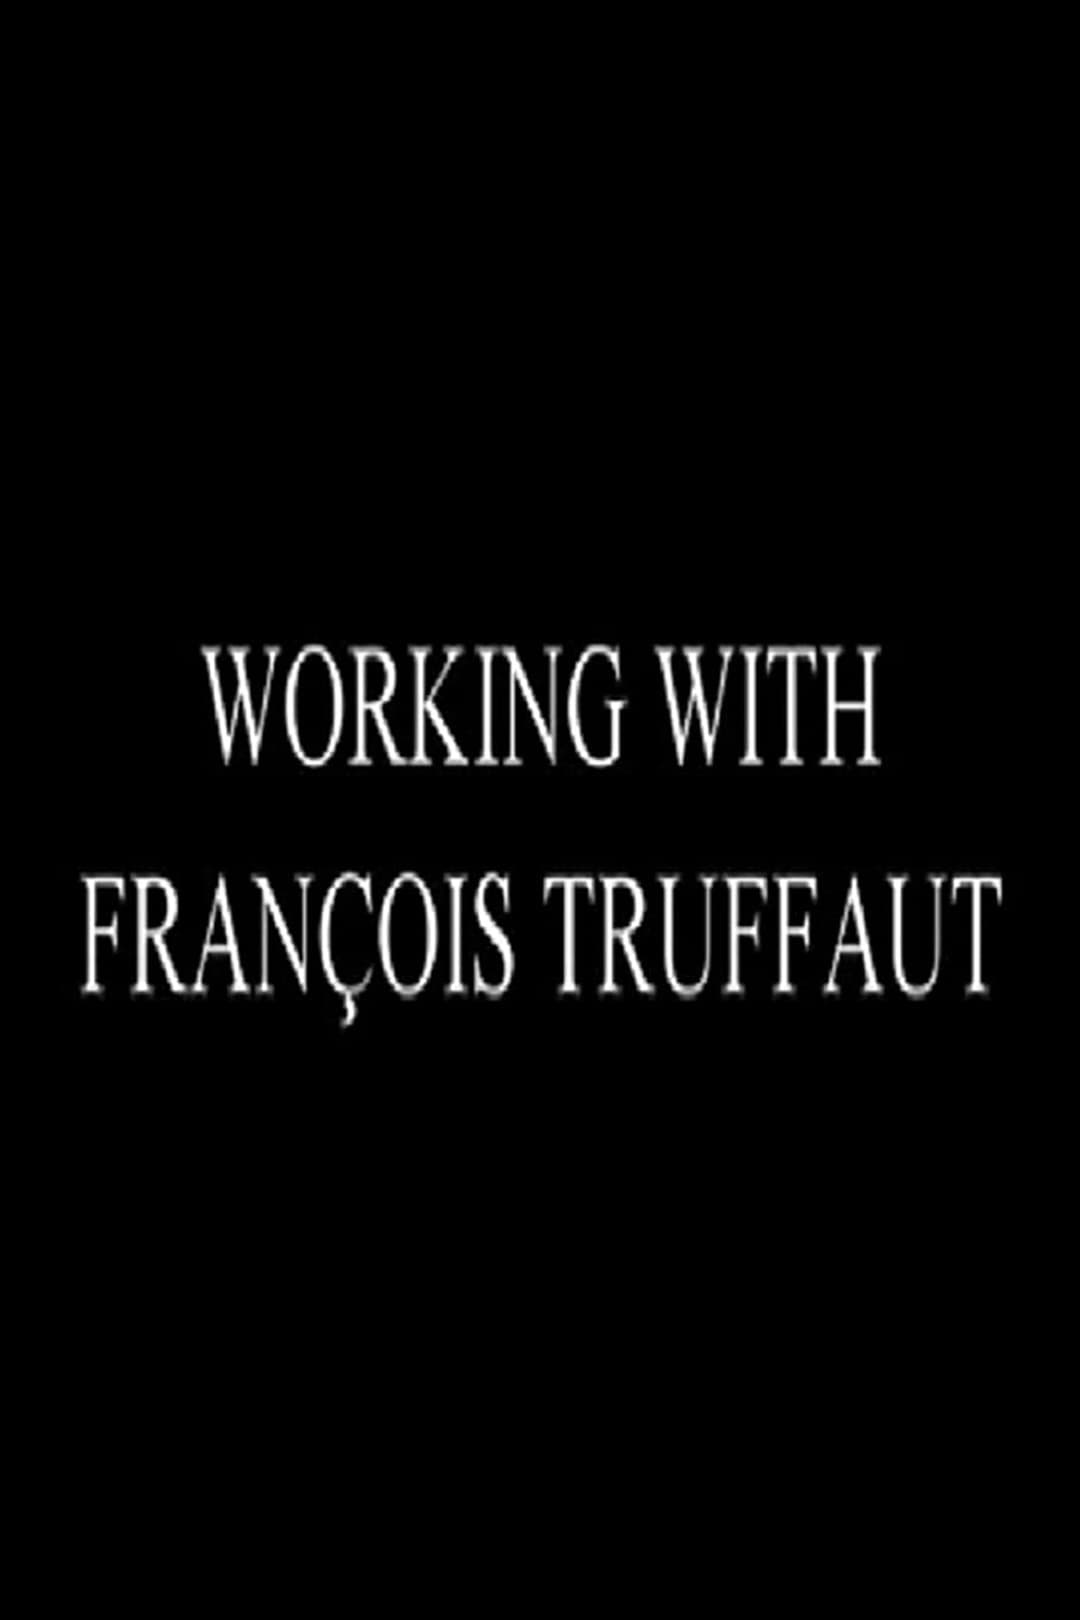 Working with François Truffaut: Nestor Almendros, Director of Photography